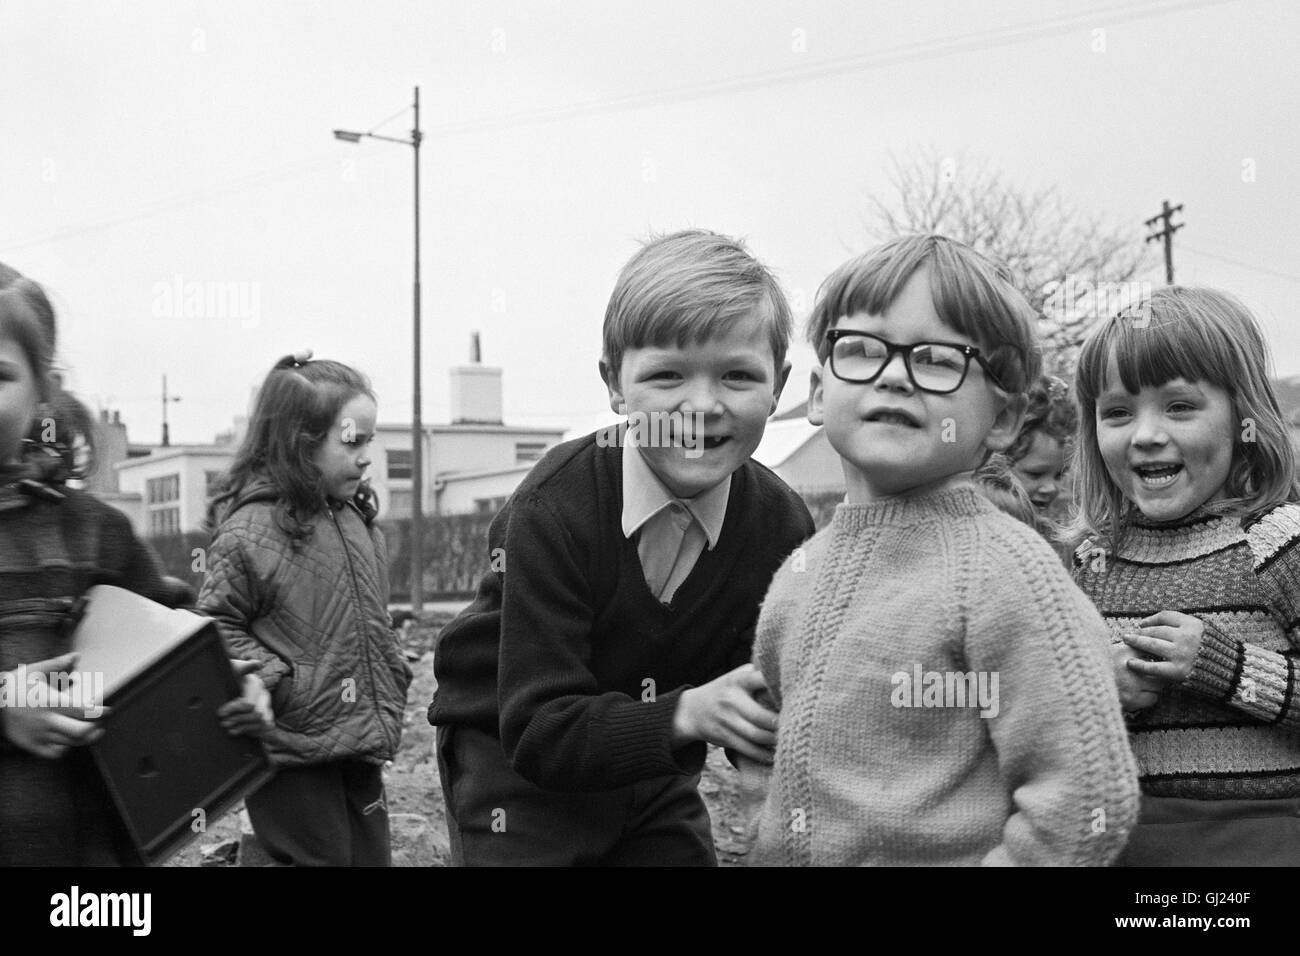 Children playing in the street, East End Glasgow 1971 Stock Photo